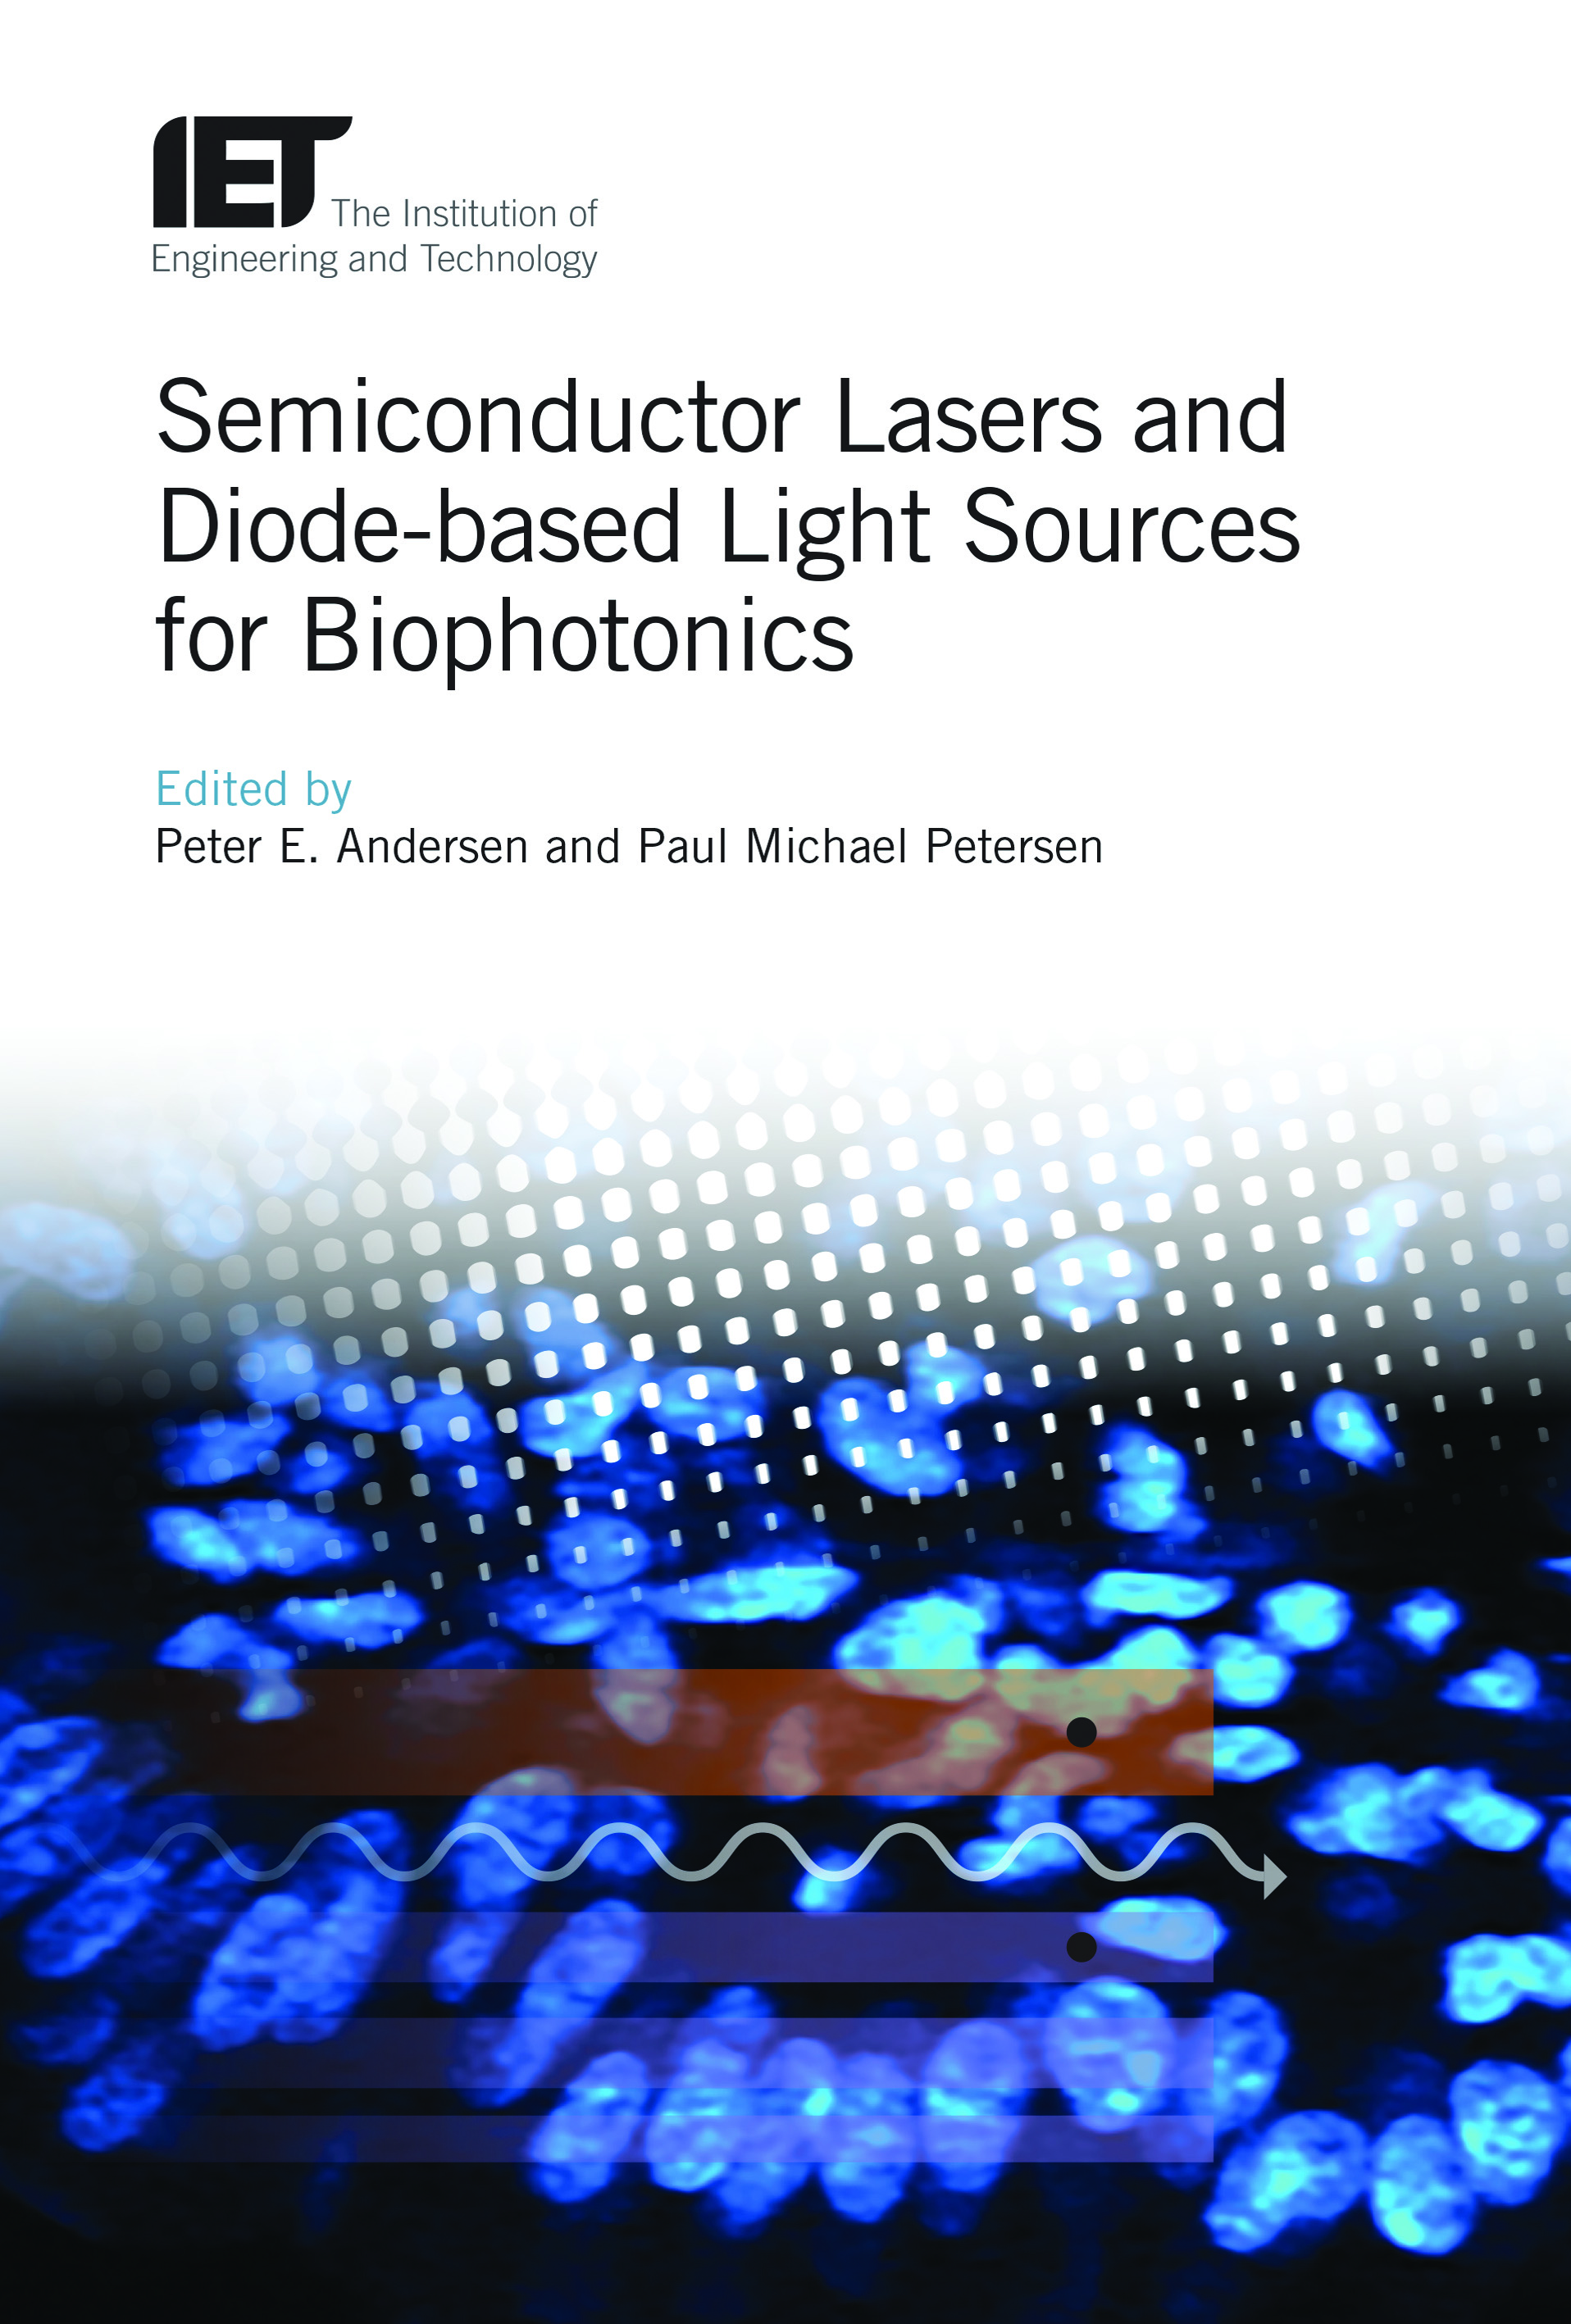 Semiconductor Lasers and Diode-based Light Sources for Biophotonics